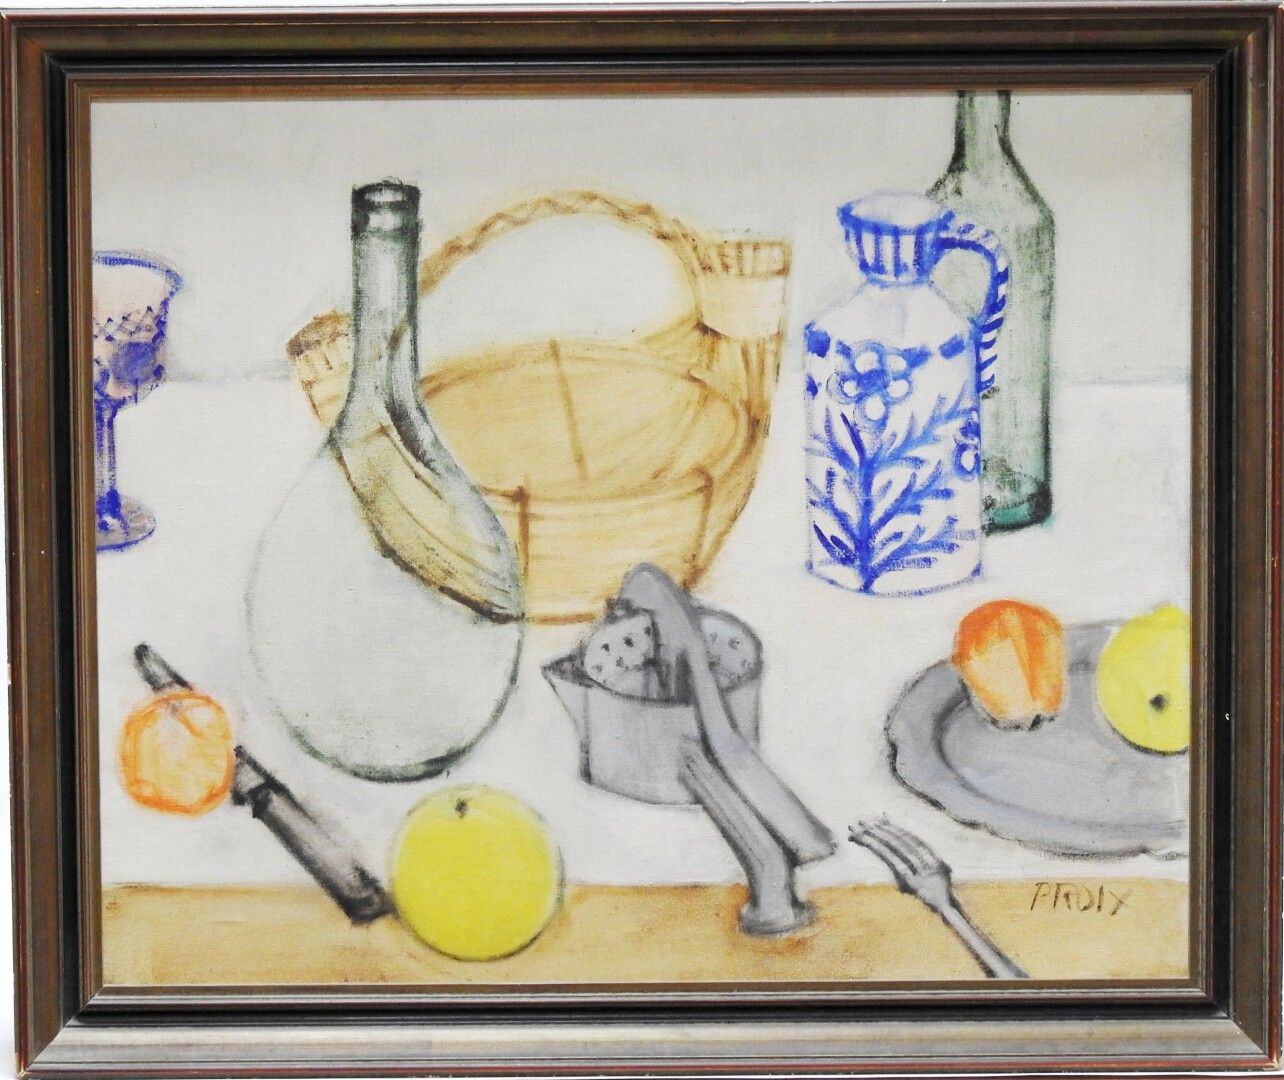 Null Jean-Paul PROIX (born in 1926)

Still life with a wine press

Oil on canvas&hellip;